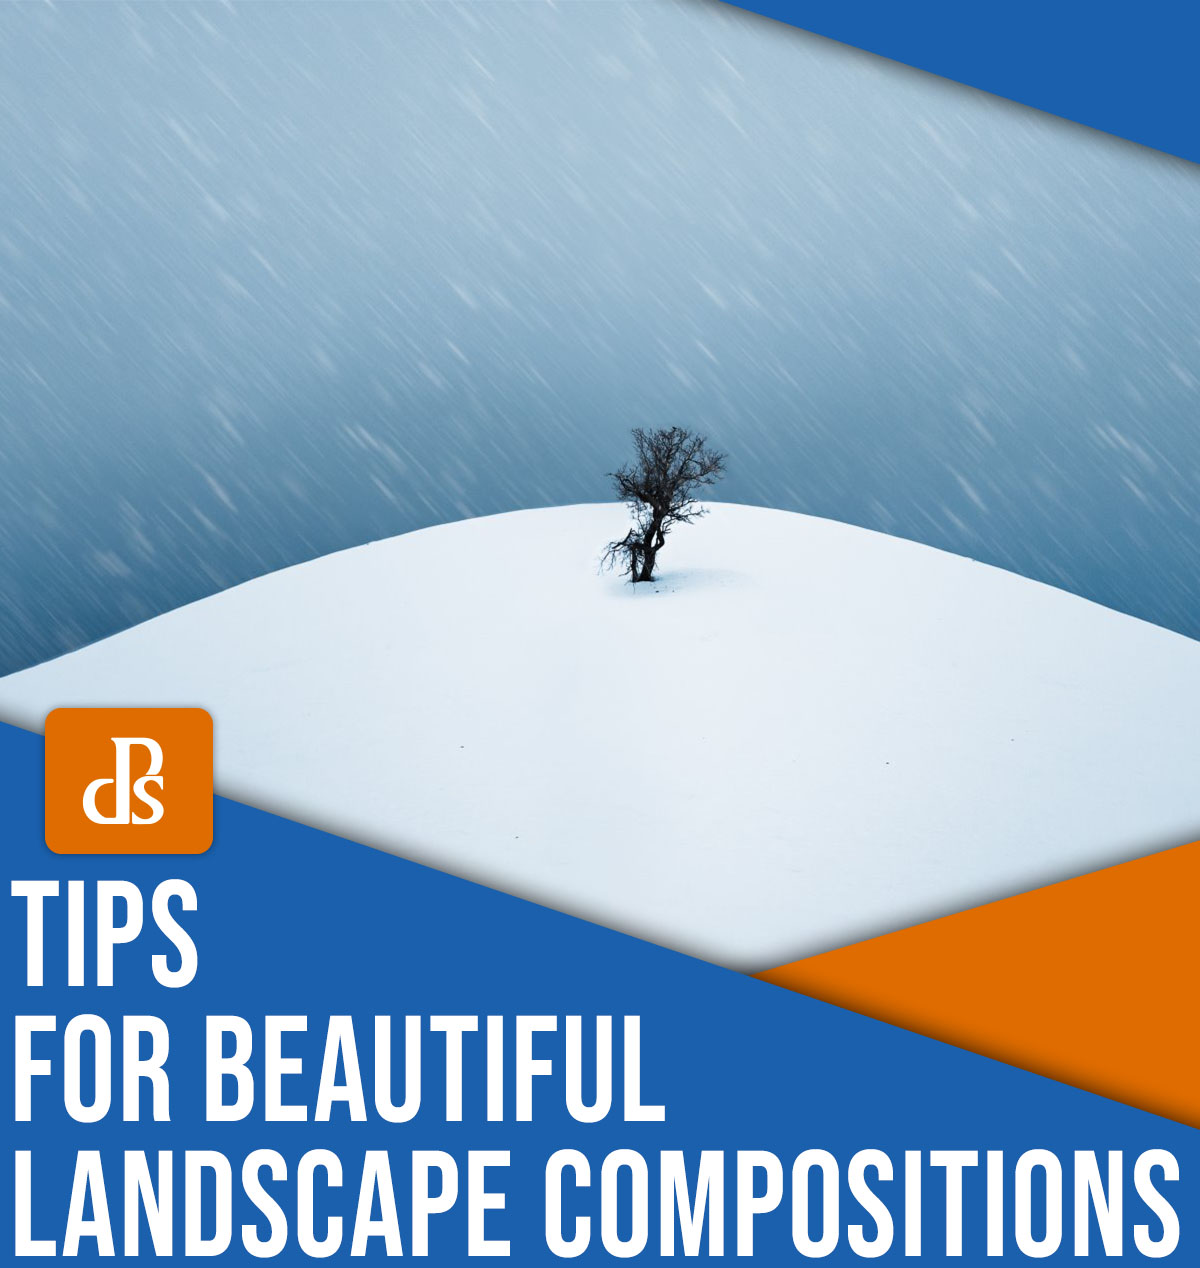 Tips for beautiful landscape compositions